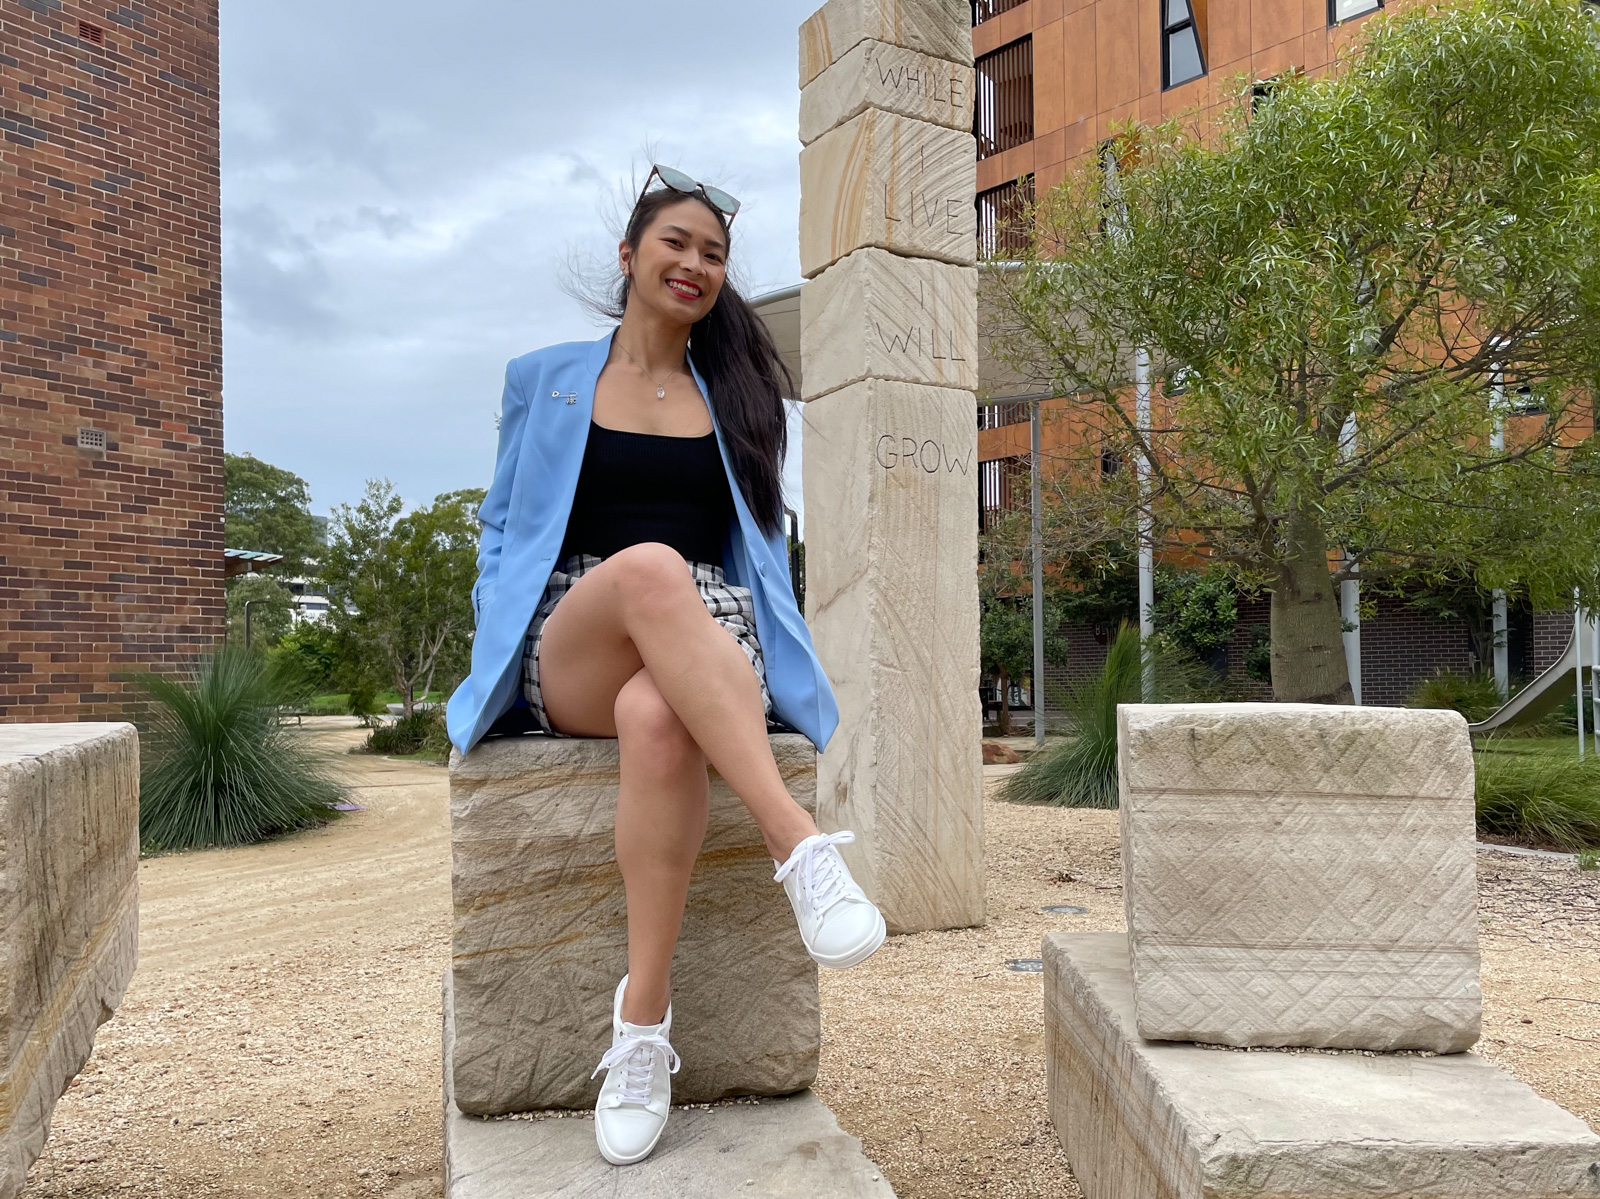 An Asian woman with long dark hair tied in a ponytail. She is wearing checkered shorts and a blue blazer. She is sitting on a giant stone step, next to a pillar carved with “While I live, I will grow”.